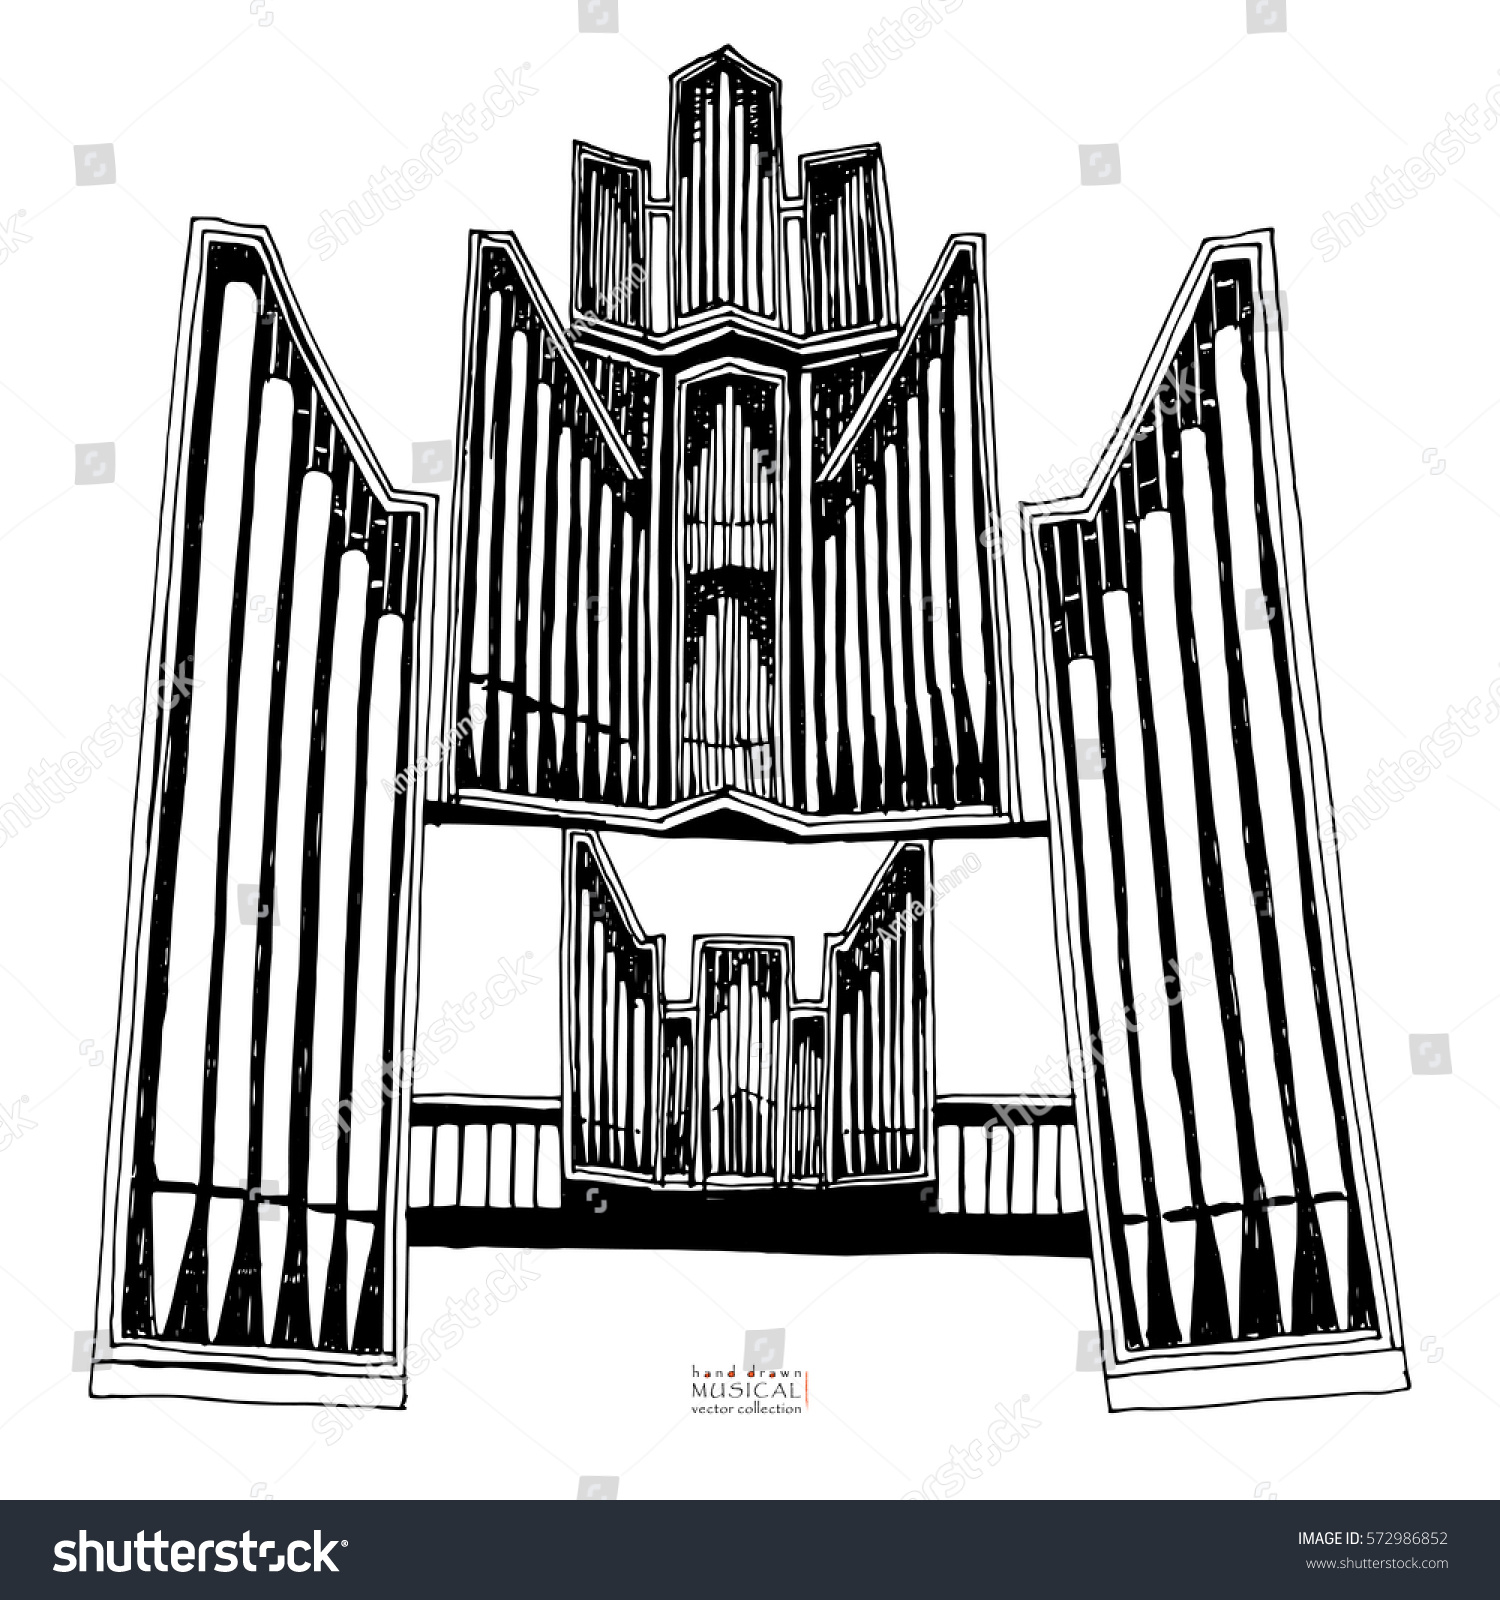 Fancy coloring of the organ